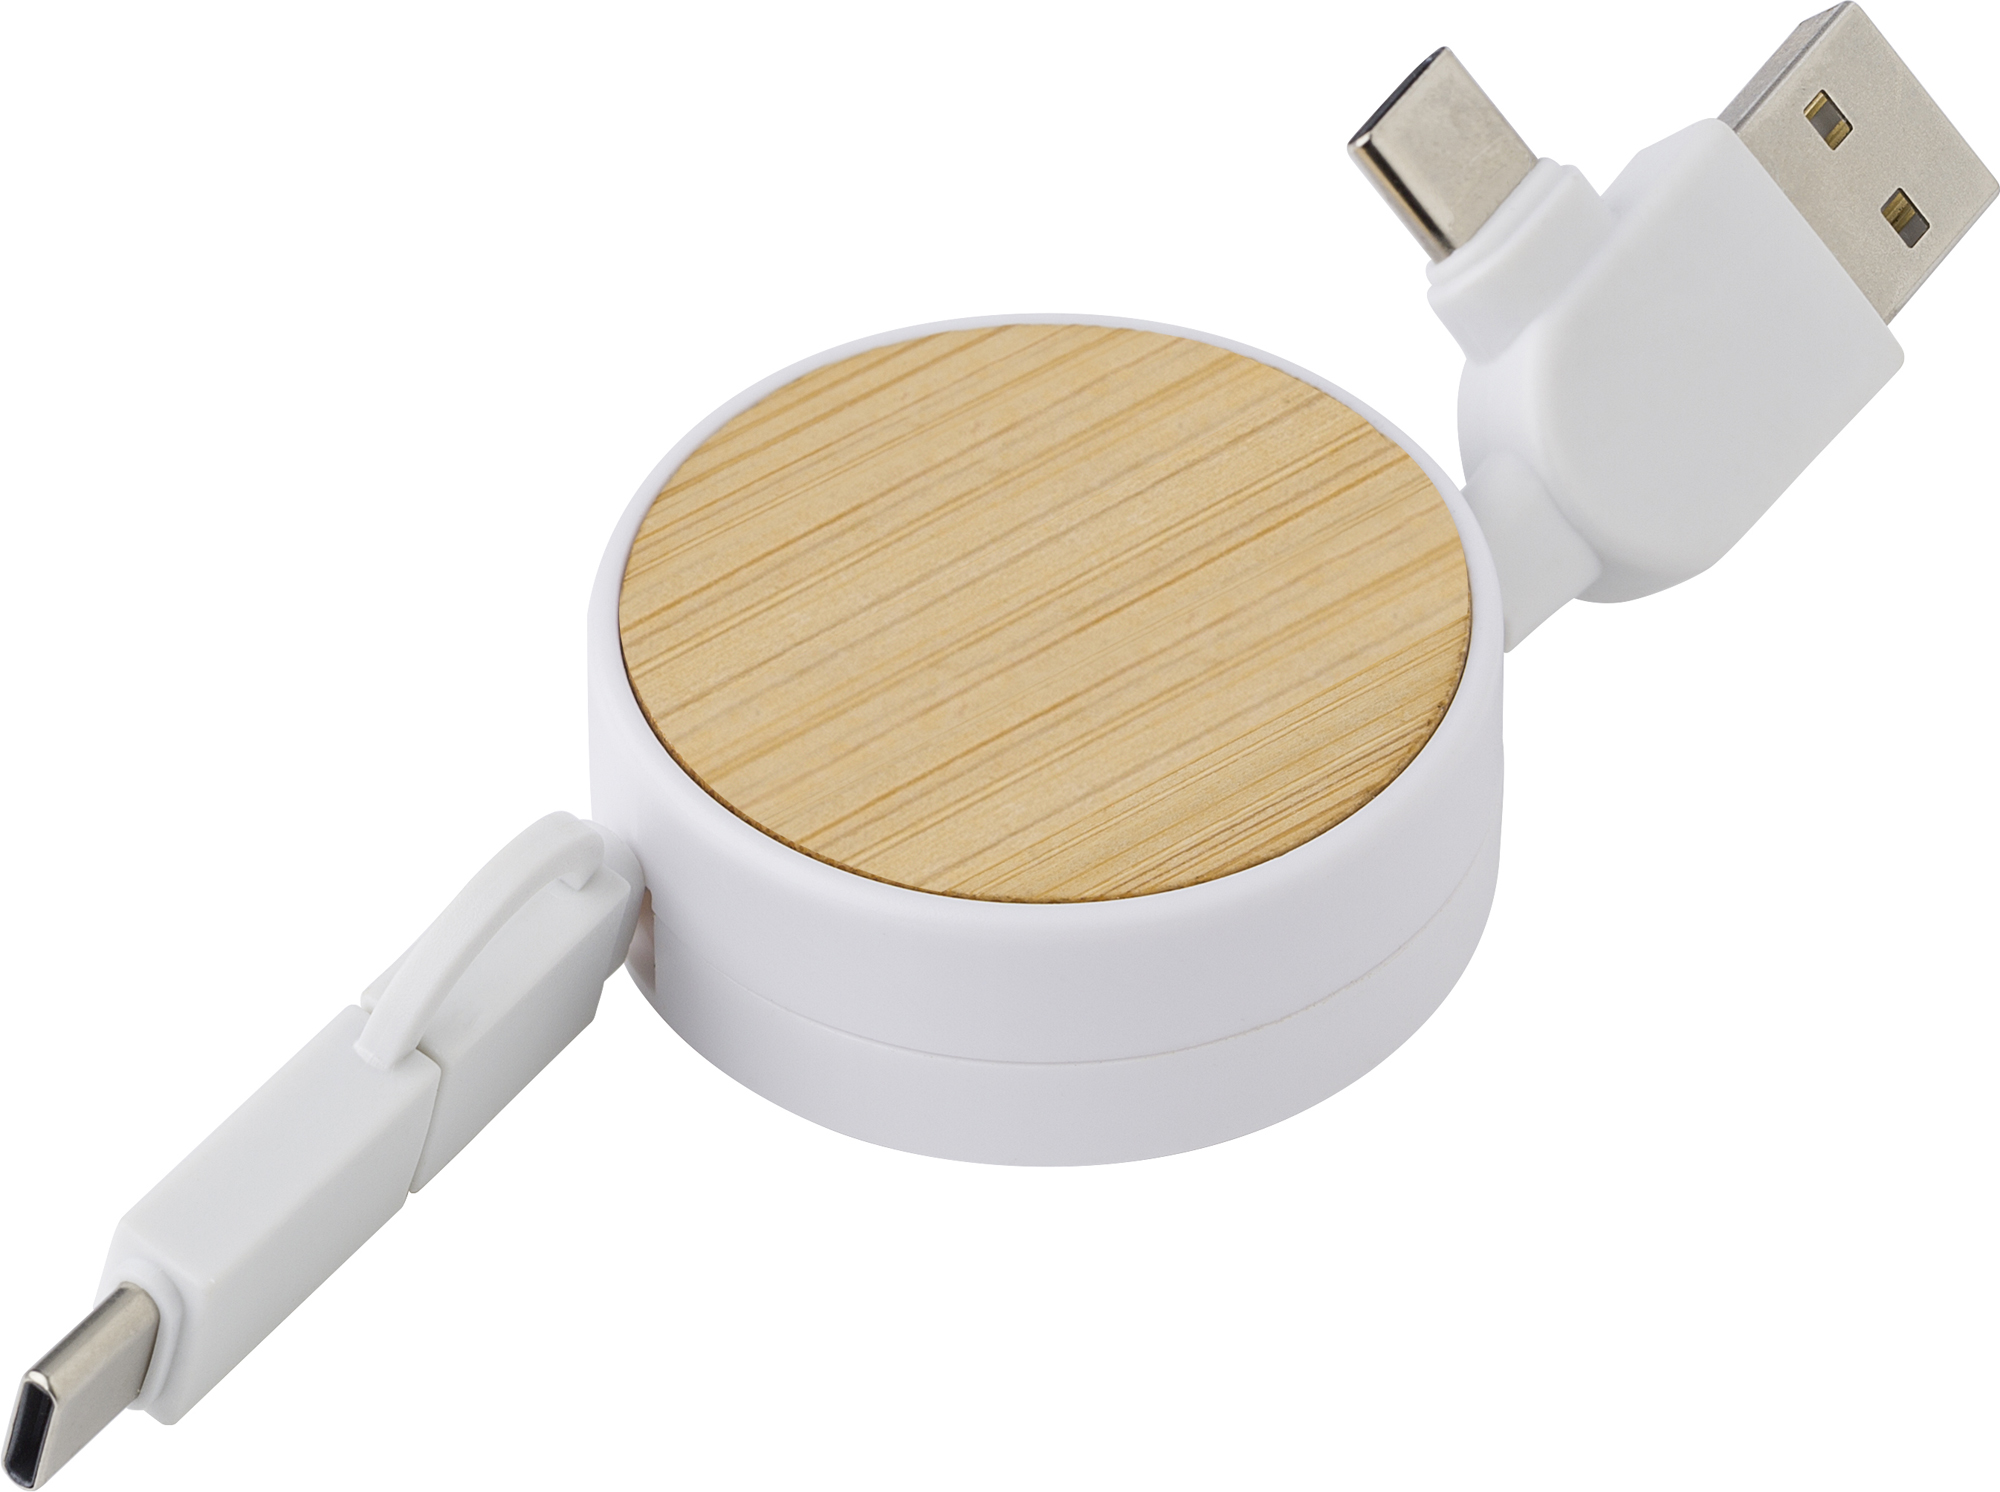 000000976586 002999999 3d045 rgt pro02 2023 fal - Bamboo extendable charging cable